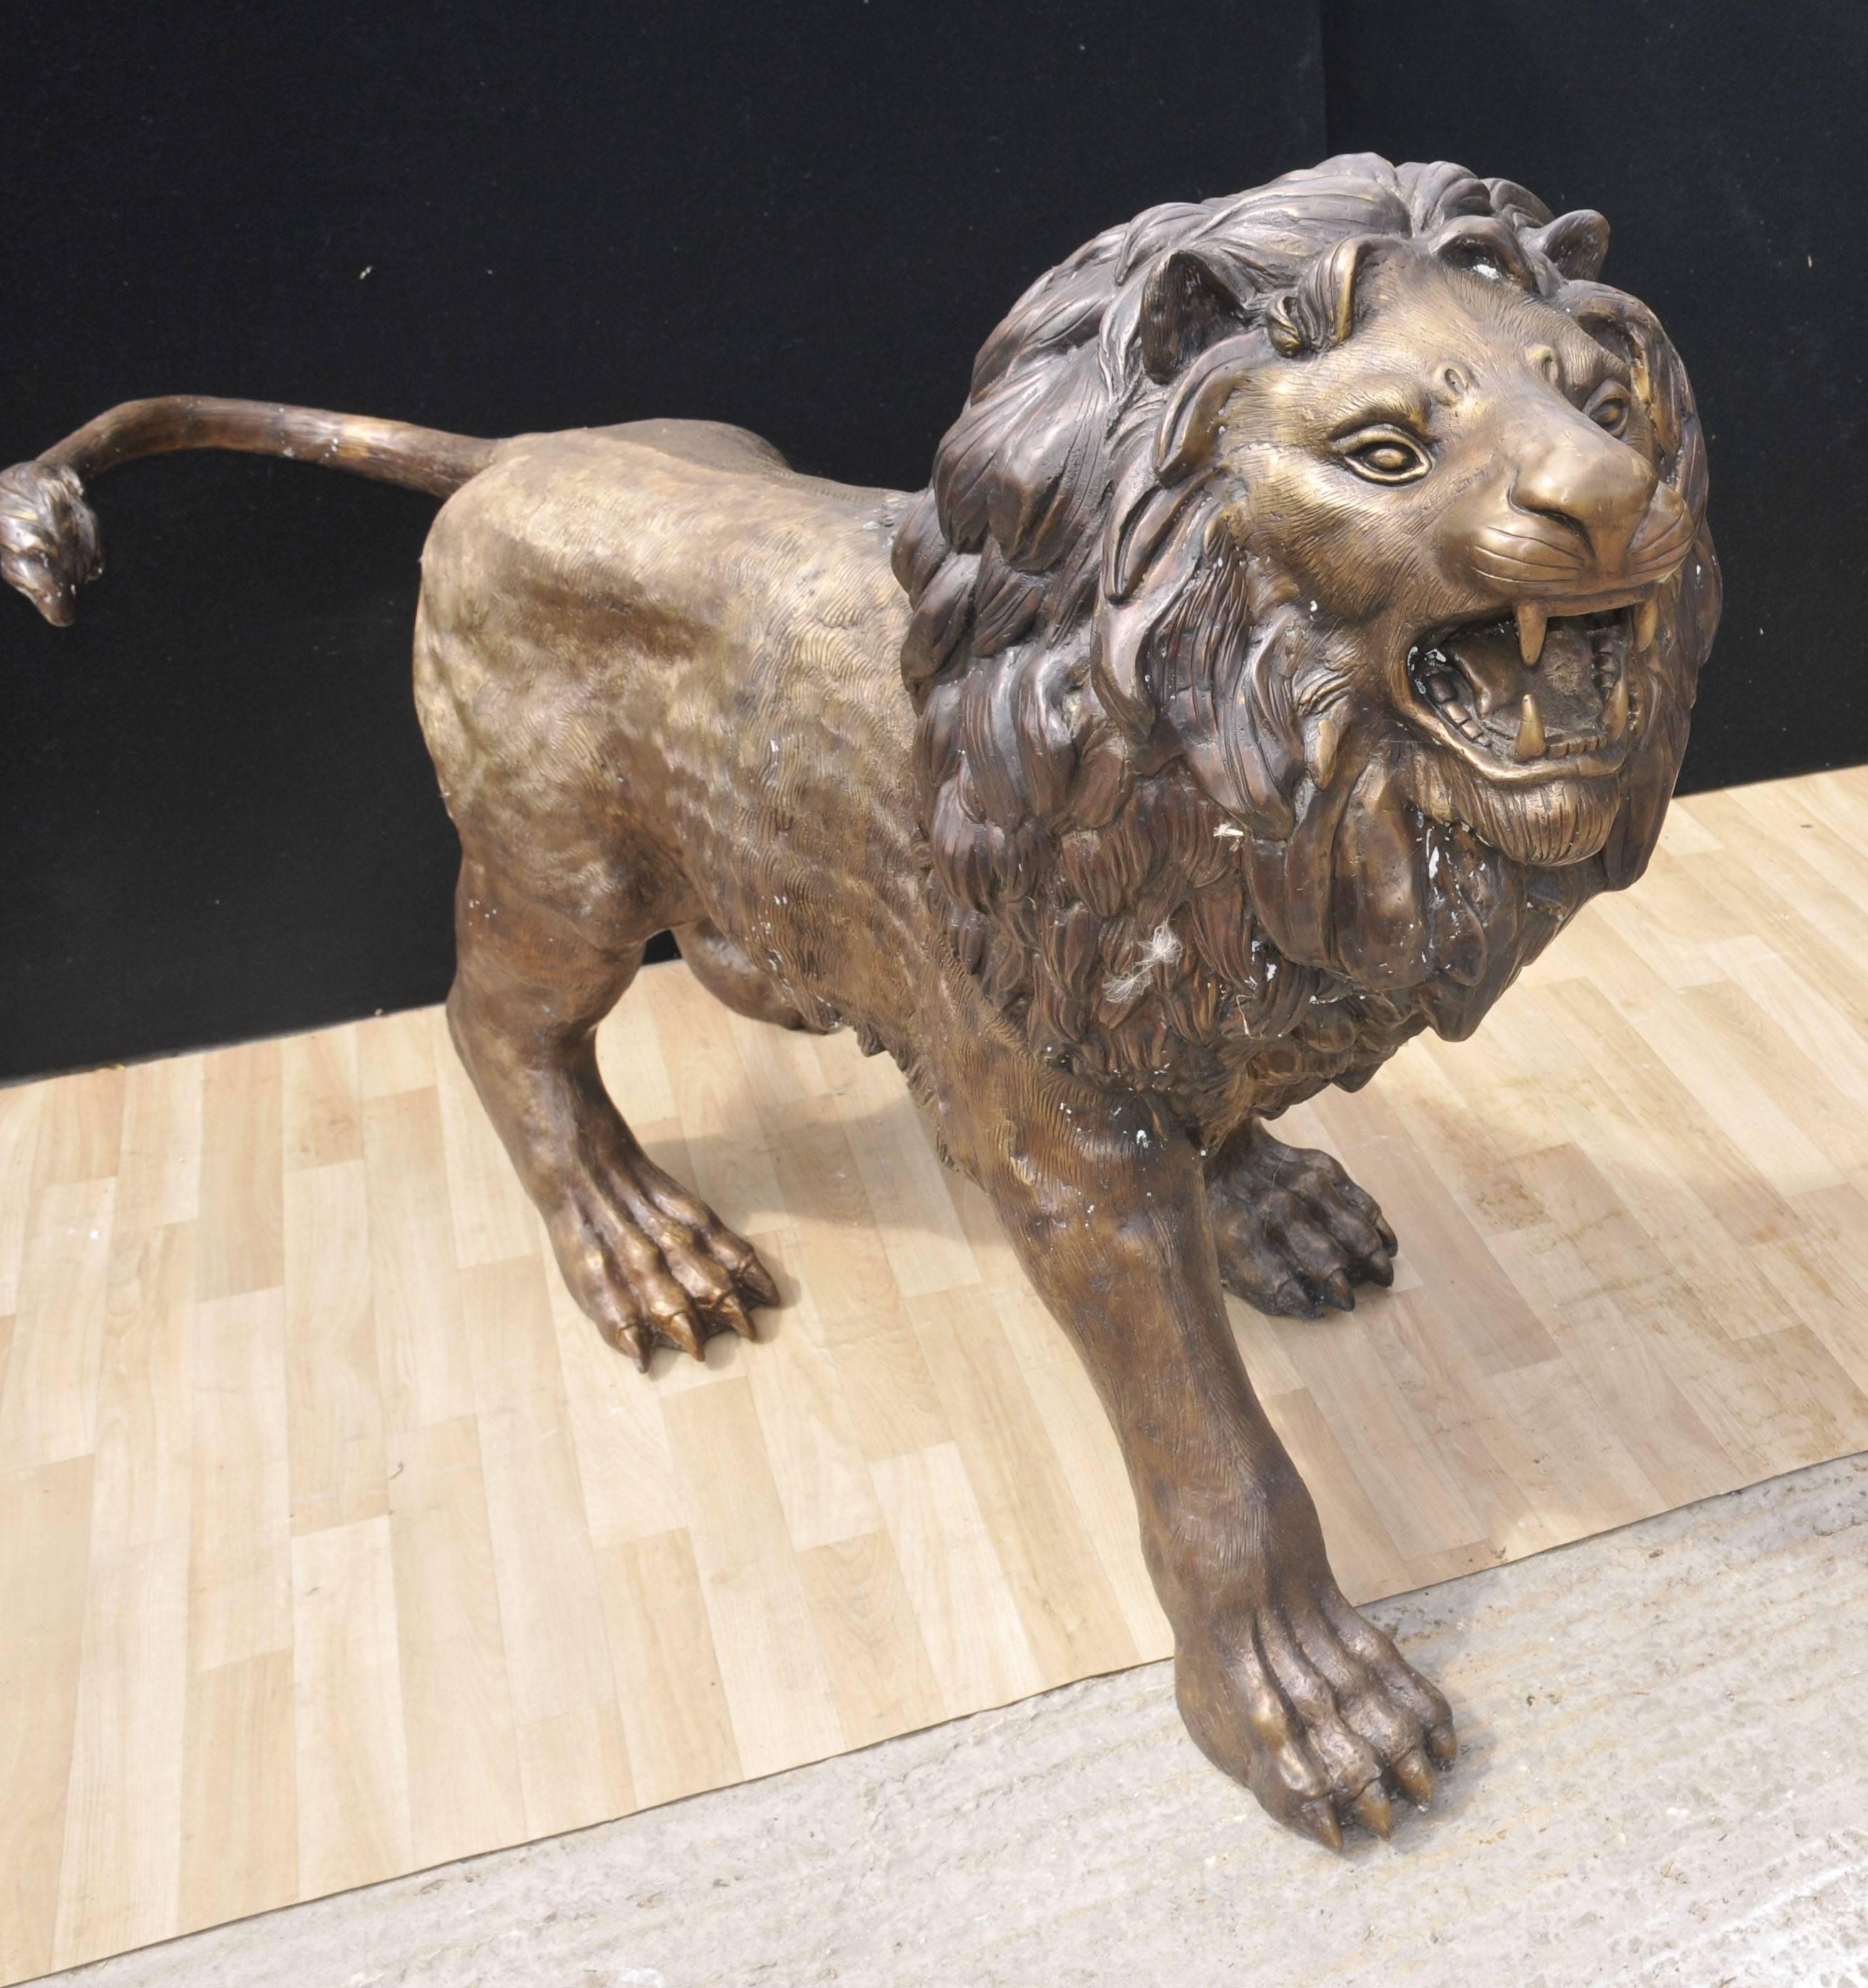 Pair giant perhaps life size bronze lion statues.
Head to tail measure five feet (152 CM) so great size.
Perfect left and right, these make for a great pair of gatekeepers for your country pile.
Patina to the bronze is superb and these can live